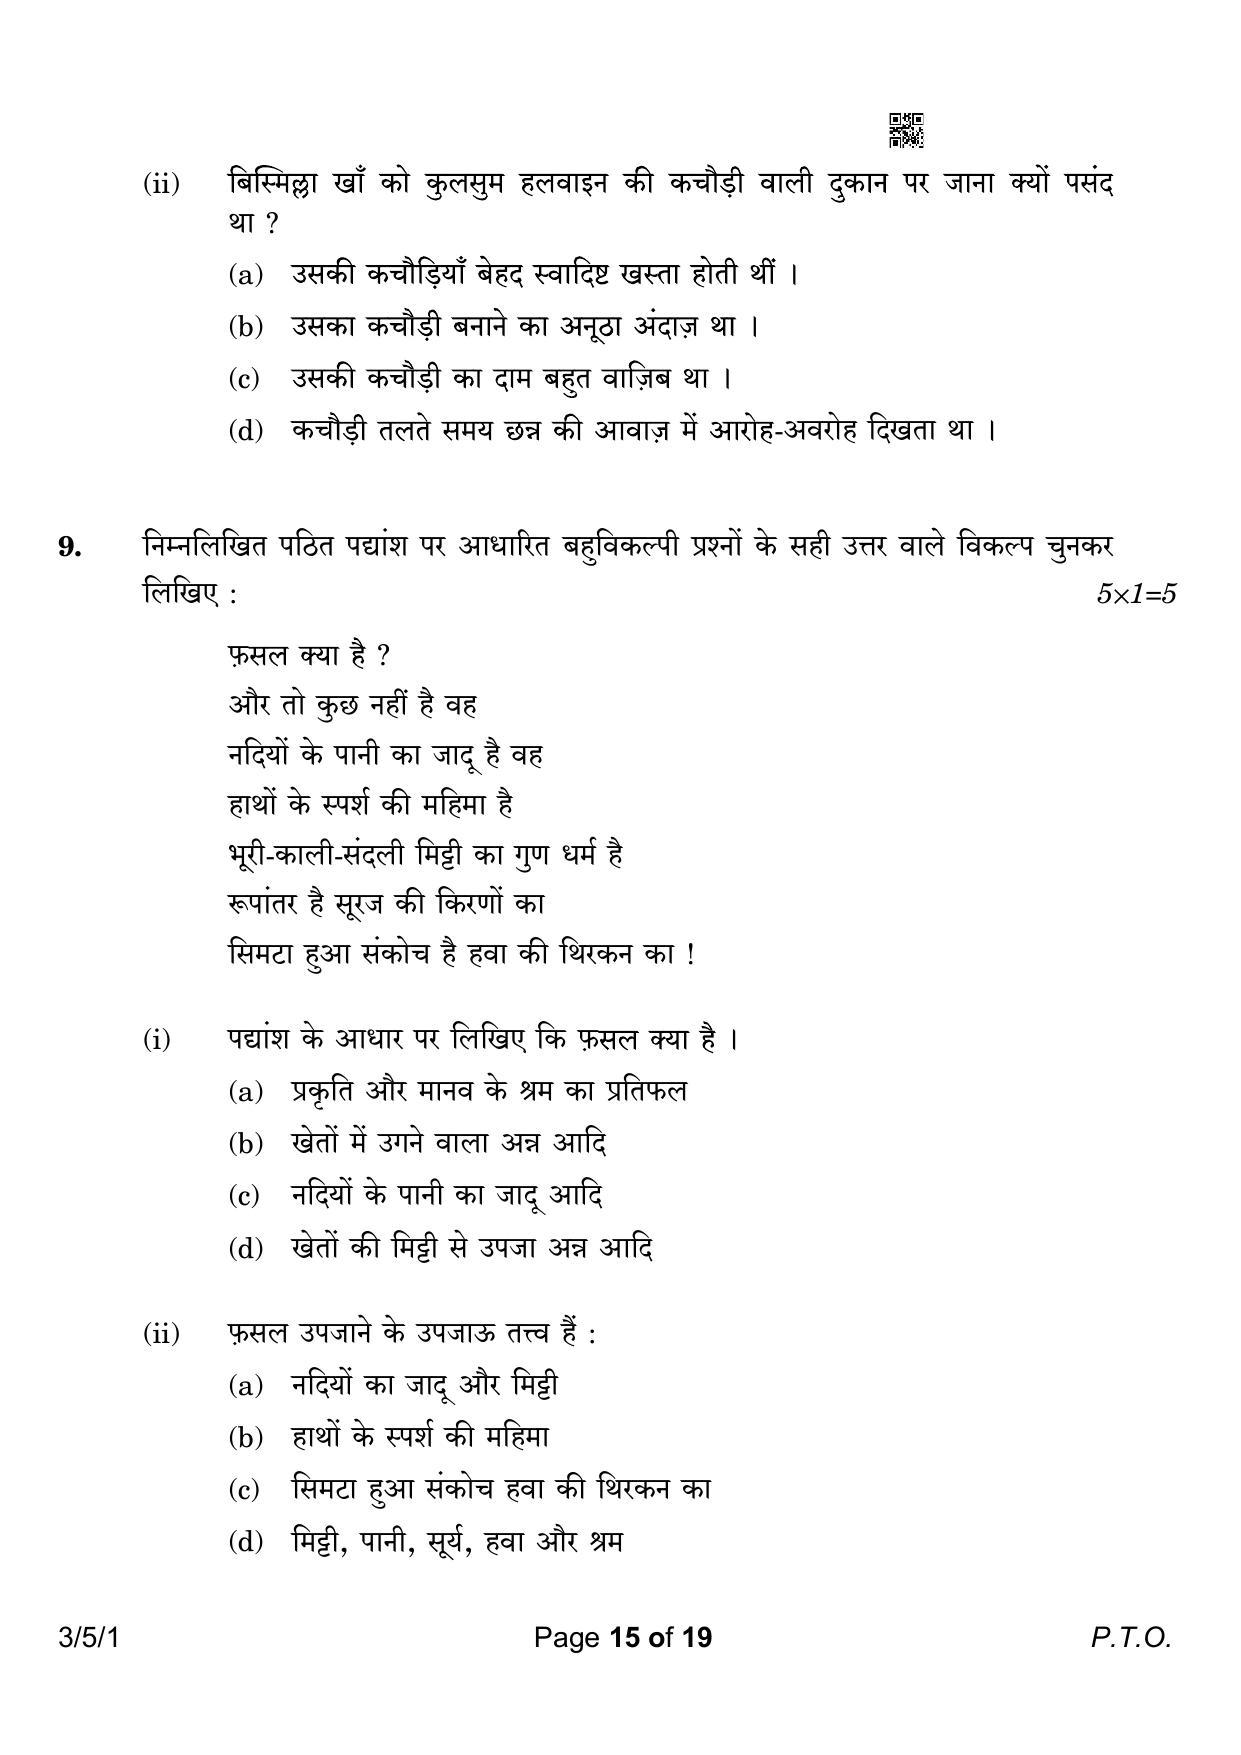 CBSE Class 10 3-5-1 Hindi A 2023 Question Paper - Page 15